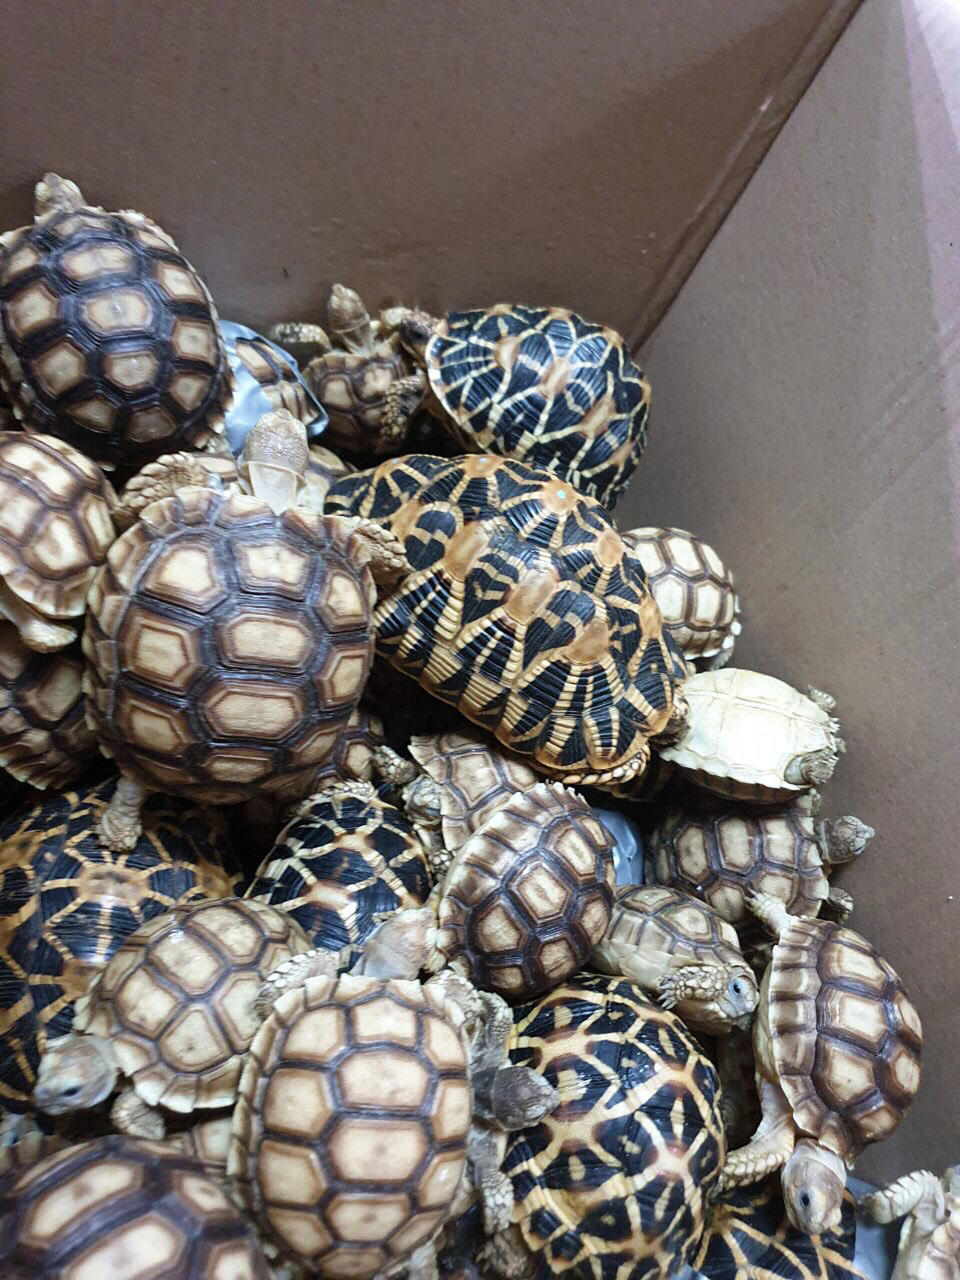 In this March 3, 2019, handout photo provided by the Bureau of Customs Public Information Office, turtles are piled inside a box as they are presented to reporters in Manila, Philippines. Philippine authorities said that they found more than 1,500 live exotic turtles stuffed inside luggage at Manila's airport. The various types of turtles were found Sunday inside four pieces of left-behind luggage of a Filipino passenger arriving at Ninoy Aquino International Airport on a Philippine Airlines flight from Hong Kong, Customs officials said in a statement. (Bureau of Customs via AP)